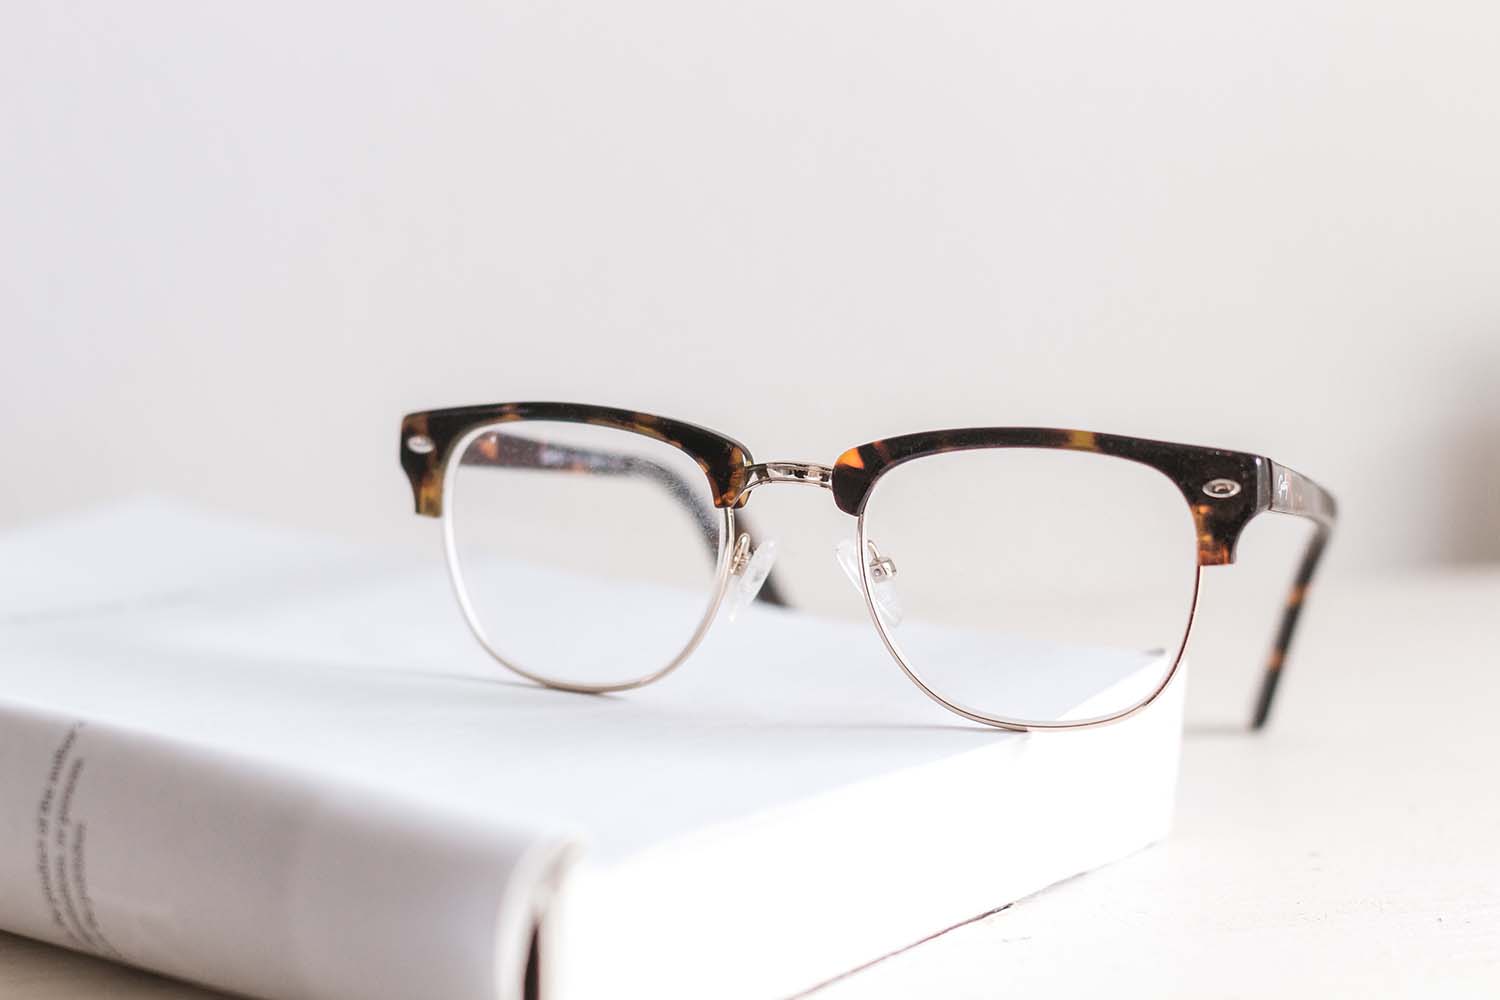 Bifocal Glasses Or Reading Glasses, How to Choose Between the Two Types